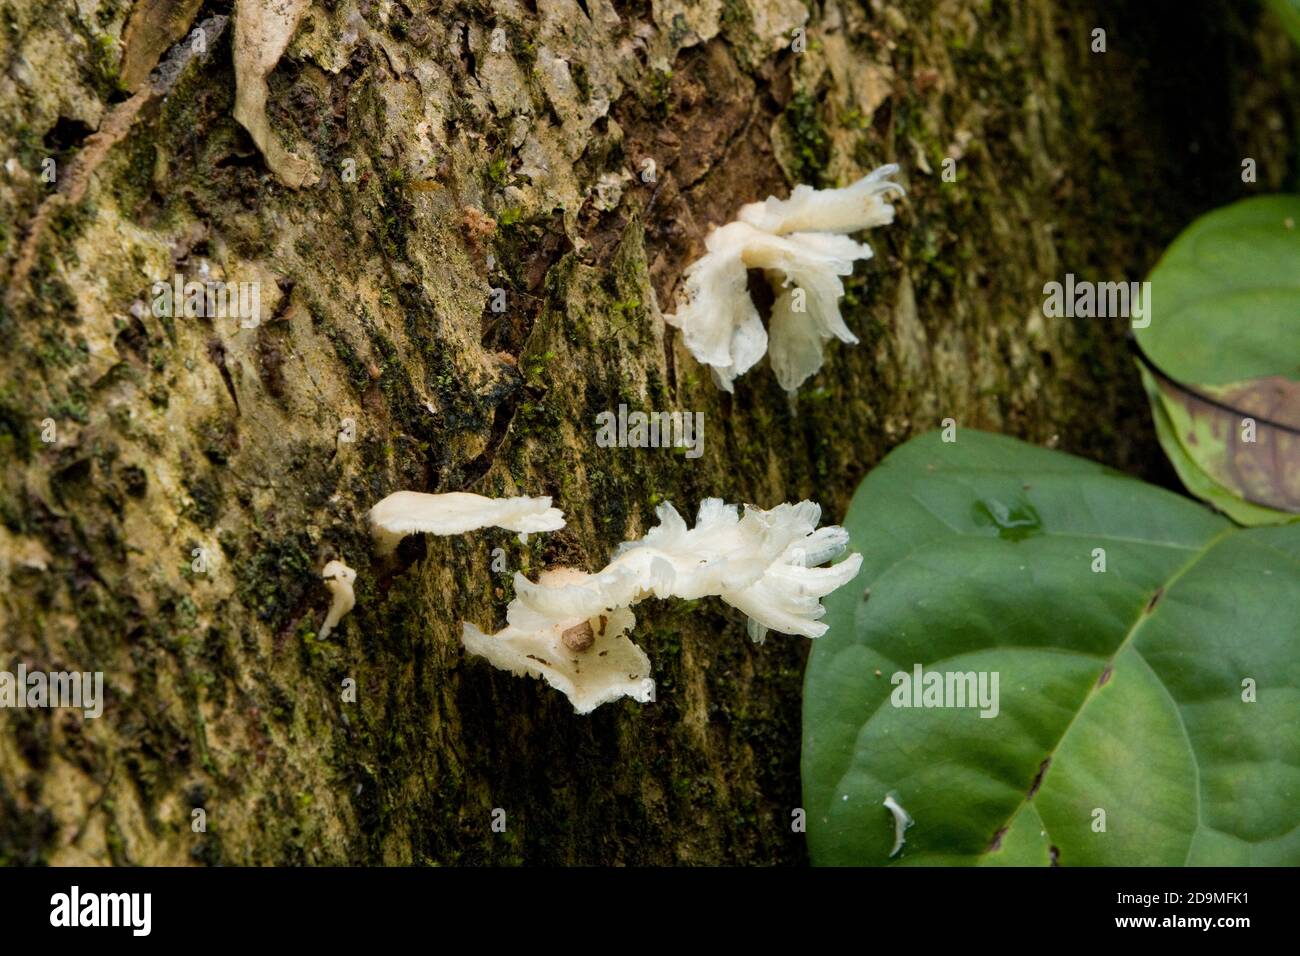 White shelf or bracket fungi on a tree trunk in the rain forests of Panama.  Fungi are one of the principal means of breaking down decaying matter and Stock Photo